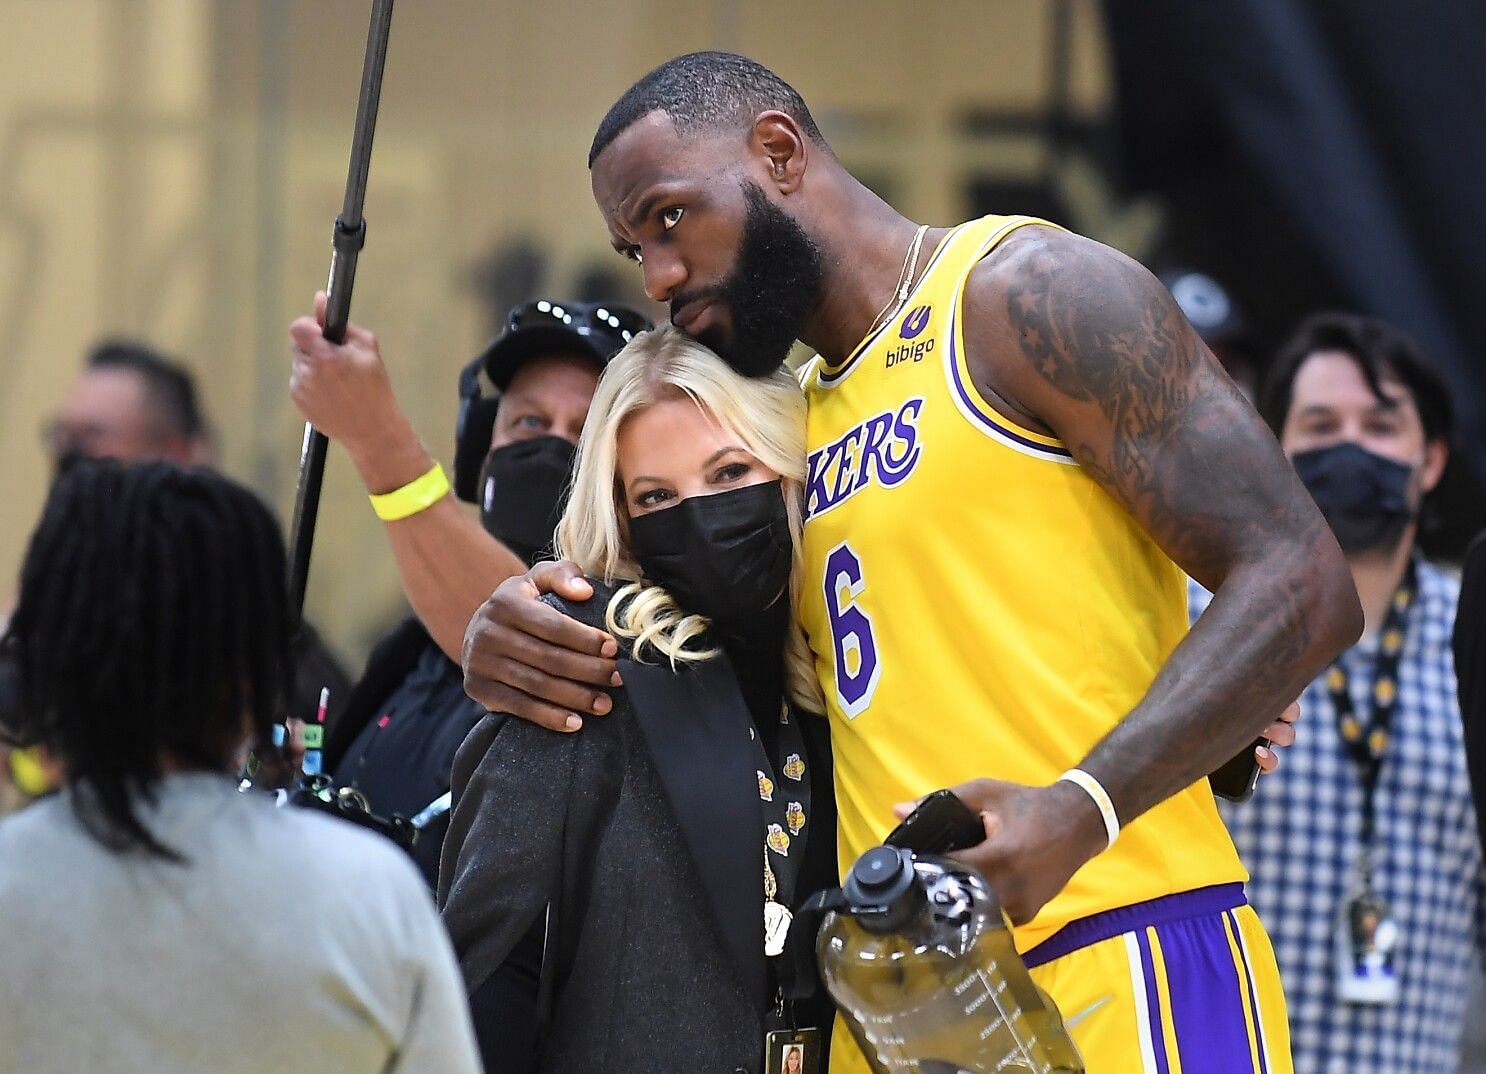 According to Chris Broussard, the LA Lakers should wrest control of team decisions from LeBron James. [Photo: LA Times]